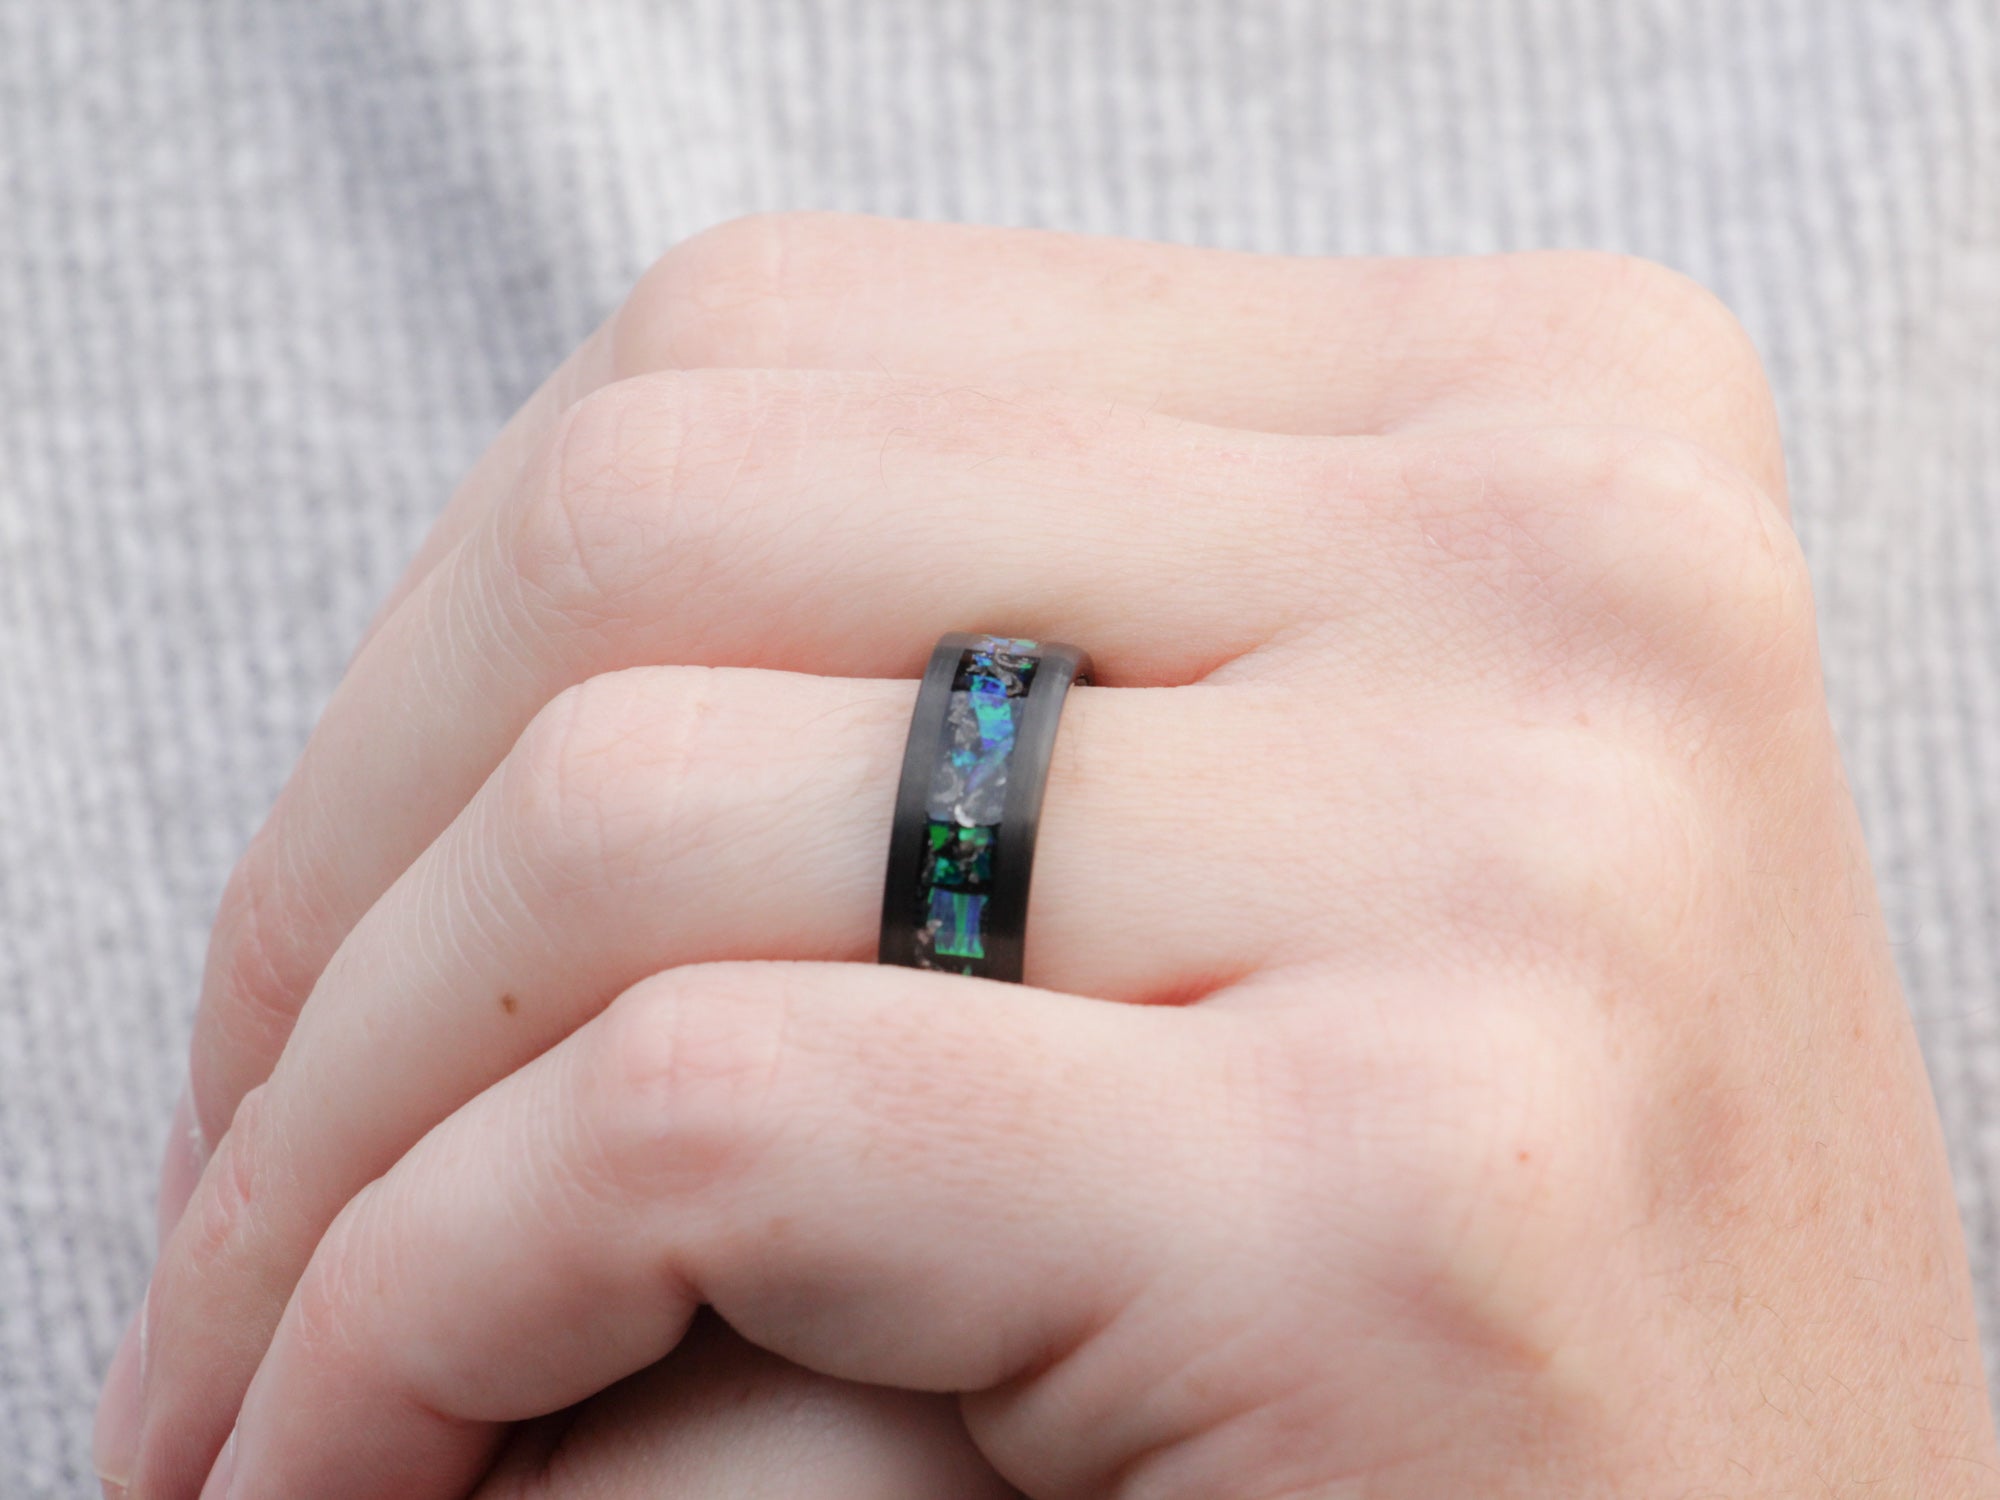 eagle nebula tungsten ring, lab grown green opal with meteorite inlay, 8mm brushed black wedding band, mens hand photo